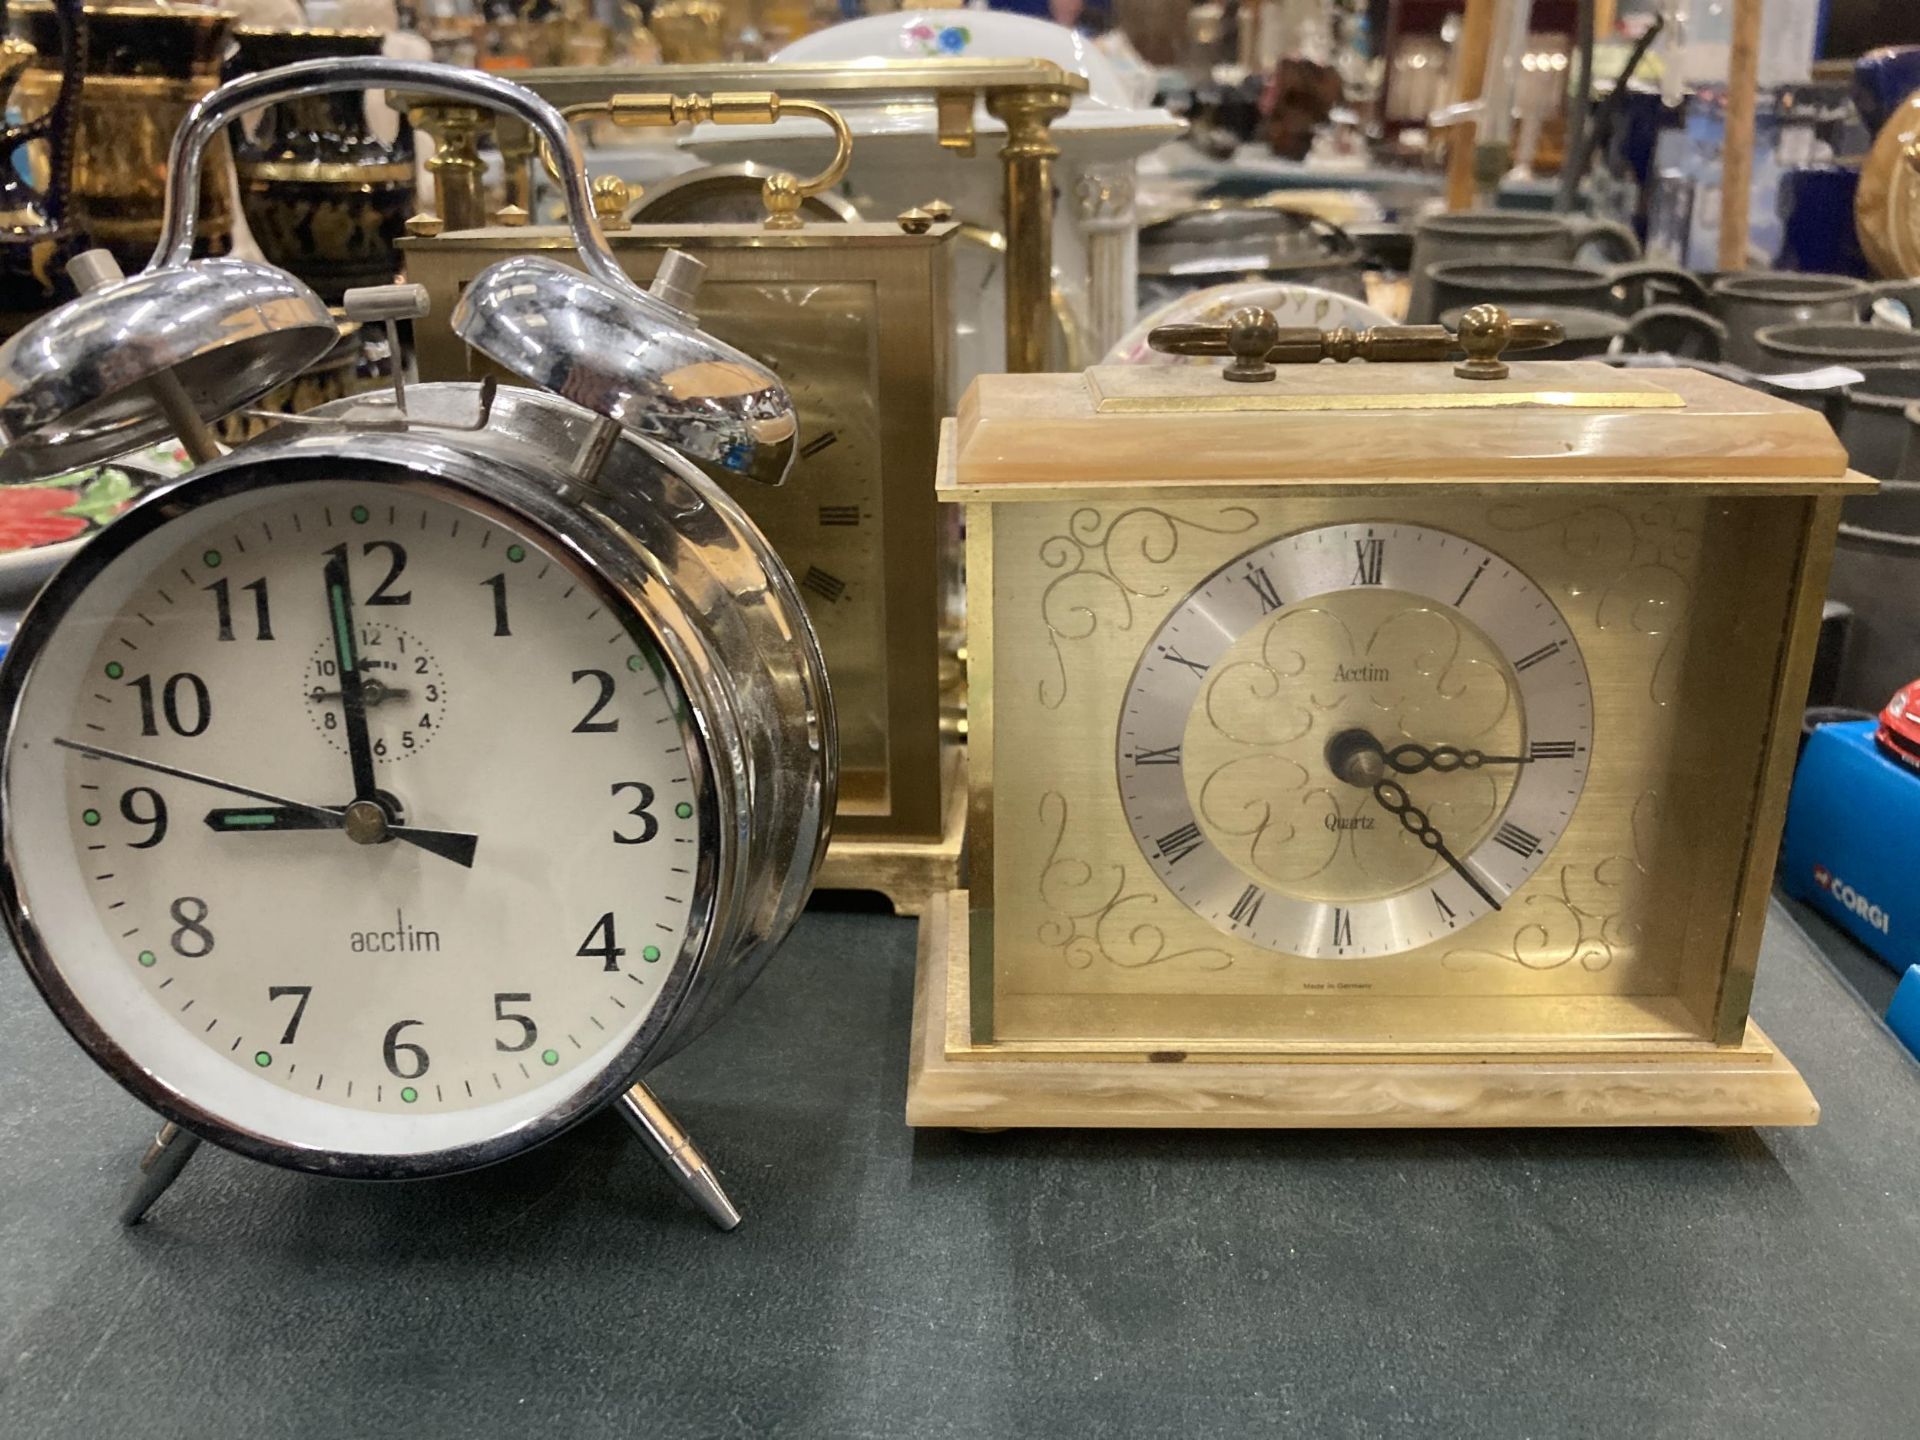 A COLLECTION OF VINTAGE CLOCKS - ACCTIM ETC - Image 3 of 5